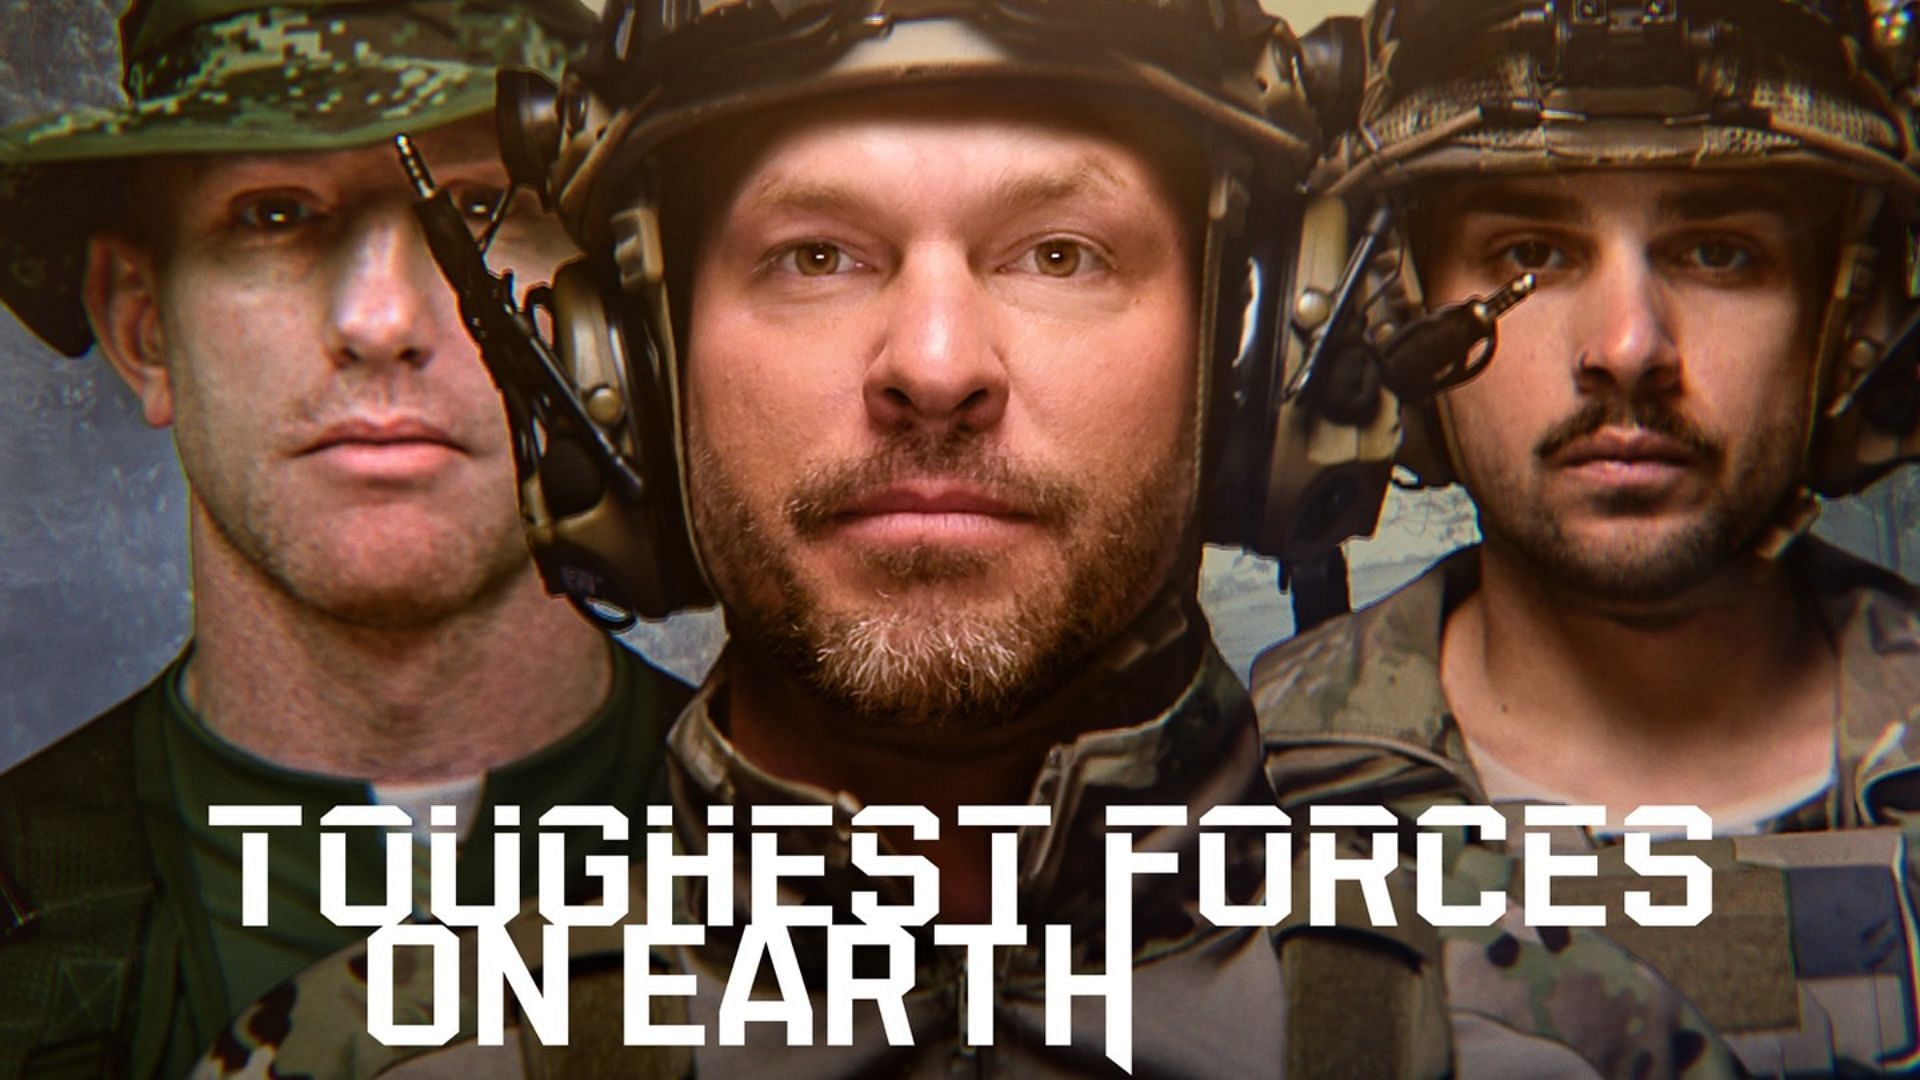 Toughest Forces on Earth (Image via @toughestforcesonearth/ Instagram)